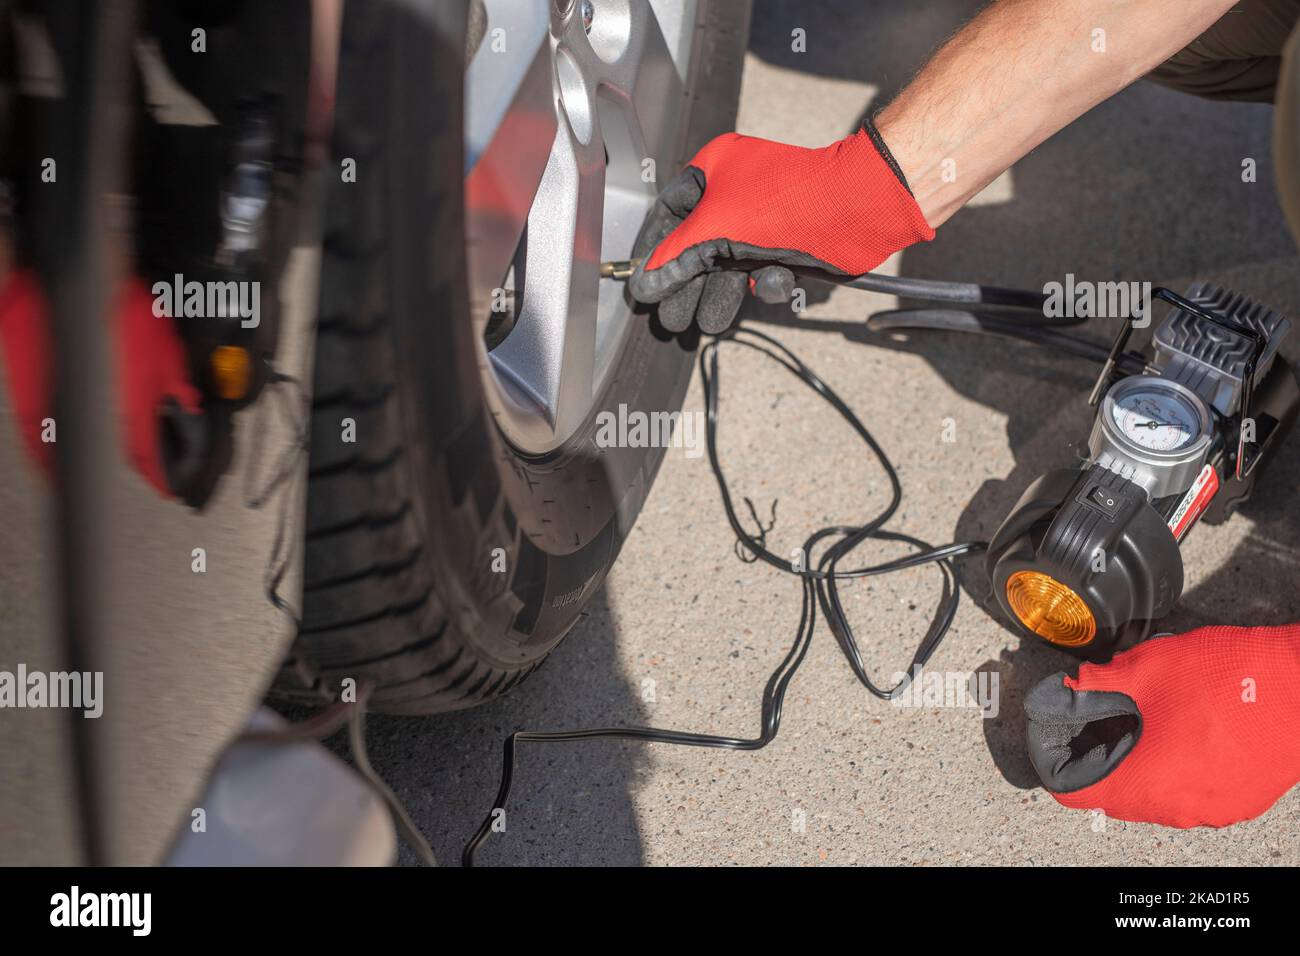 Tire pump inflating car wheel. Tyre inflator in male hands. Stock Photo